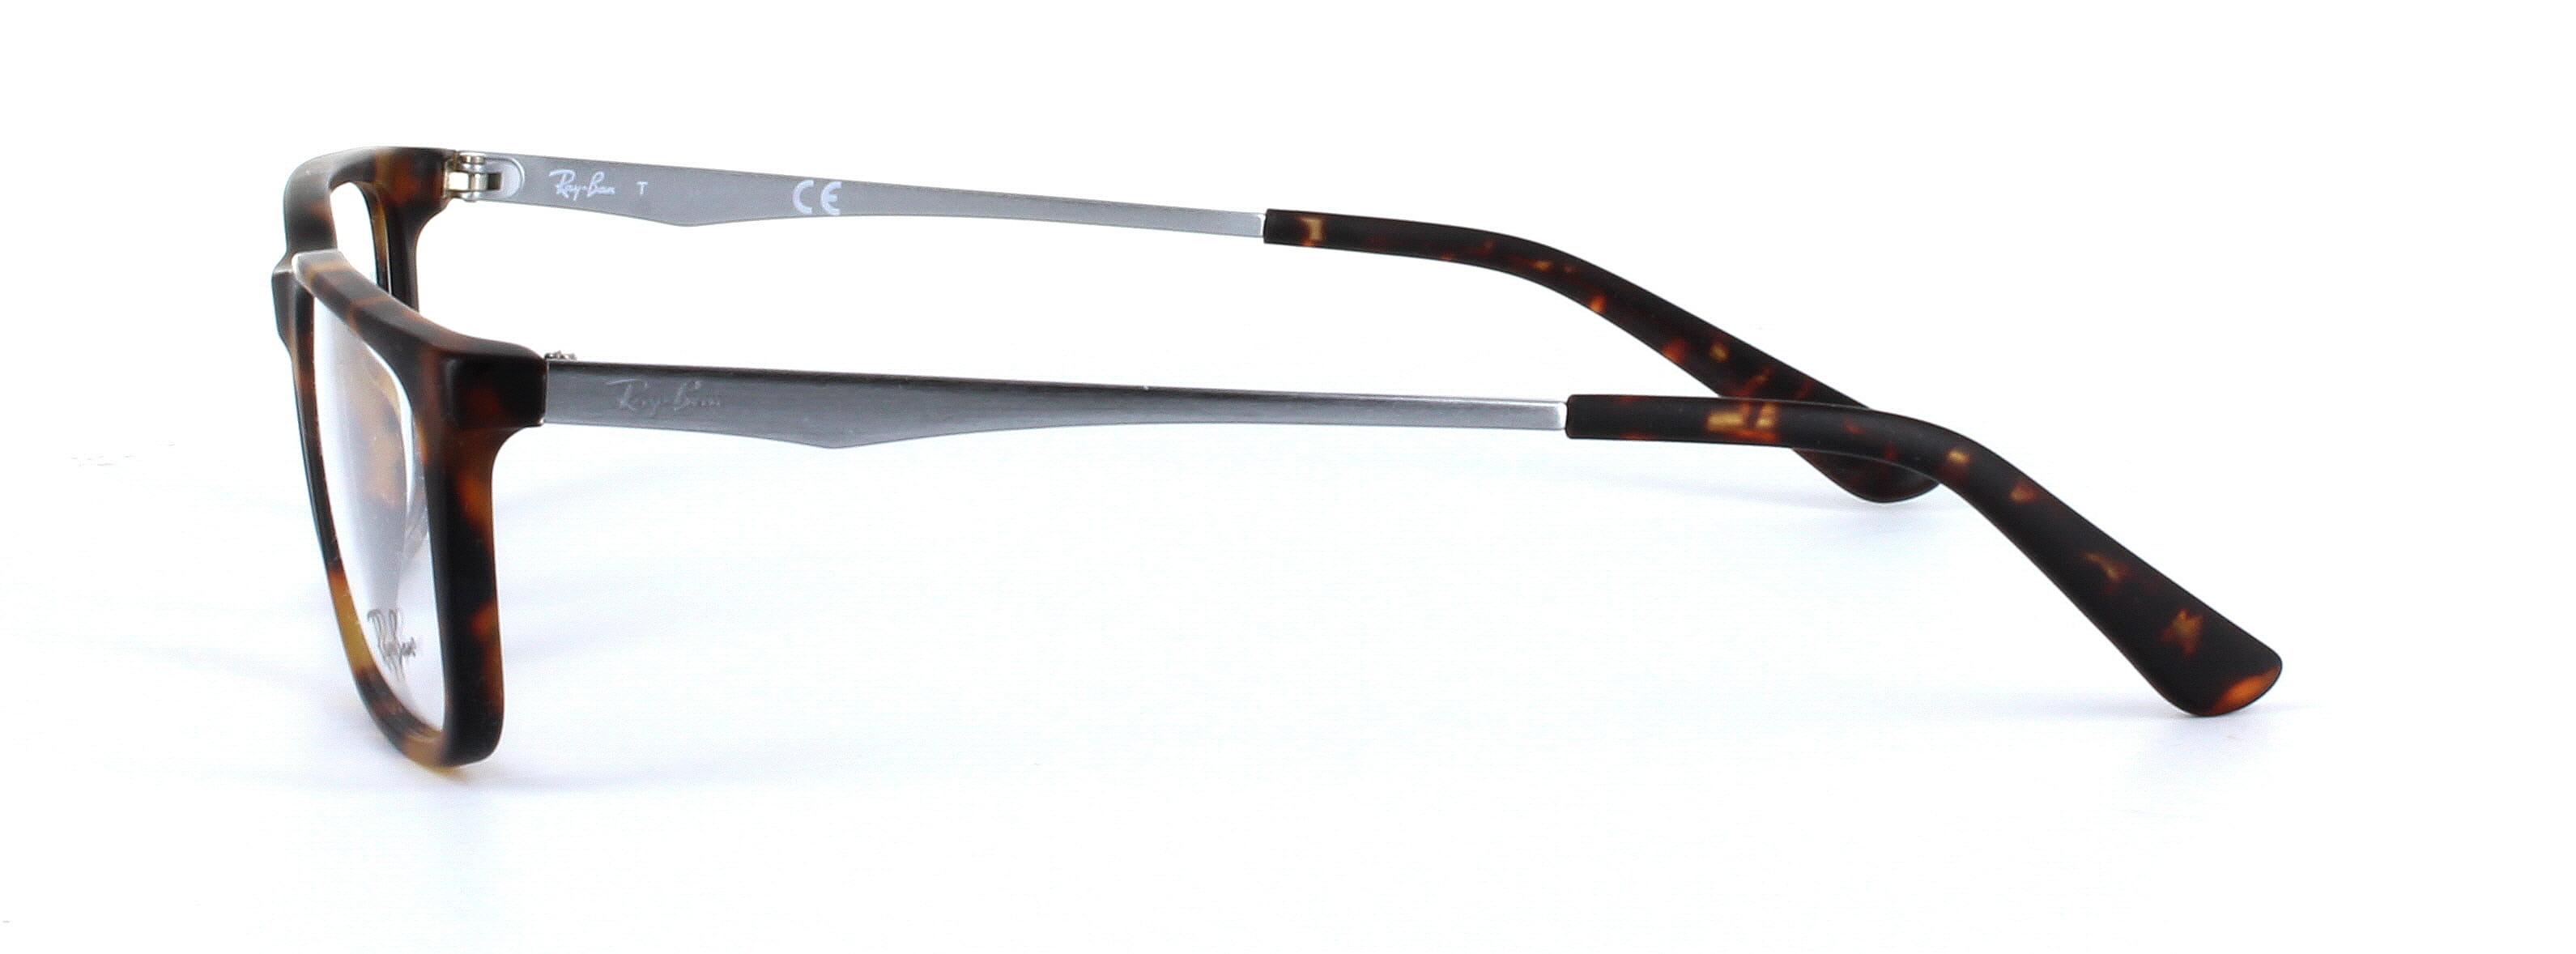 Ray ban 53121 - Unisex tortoise frame with metal arms - image 2